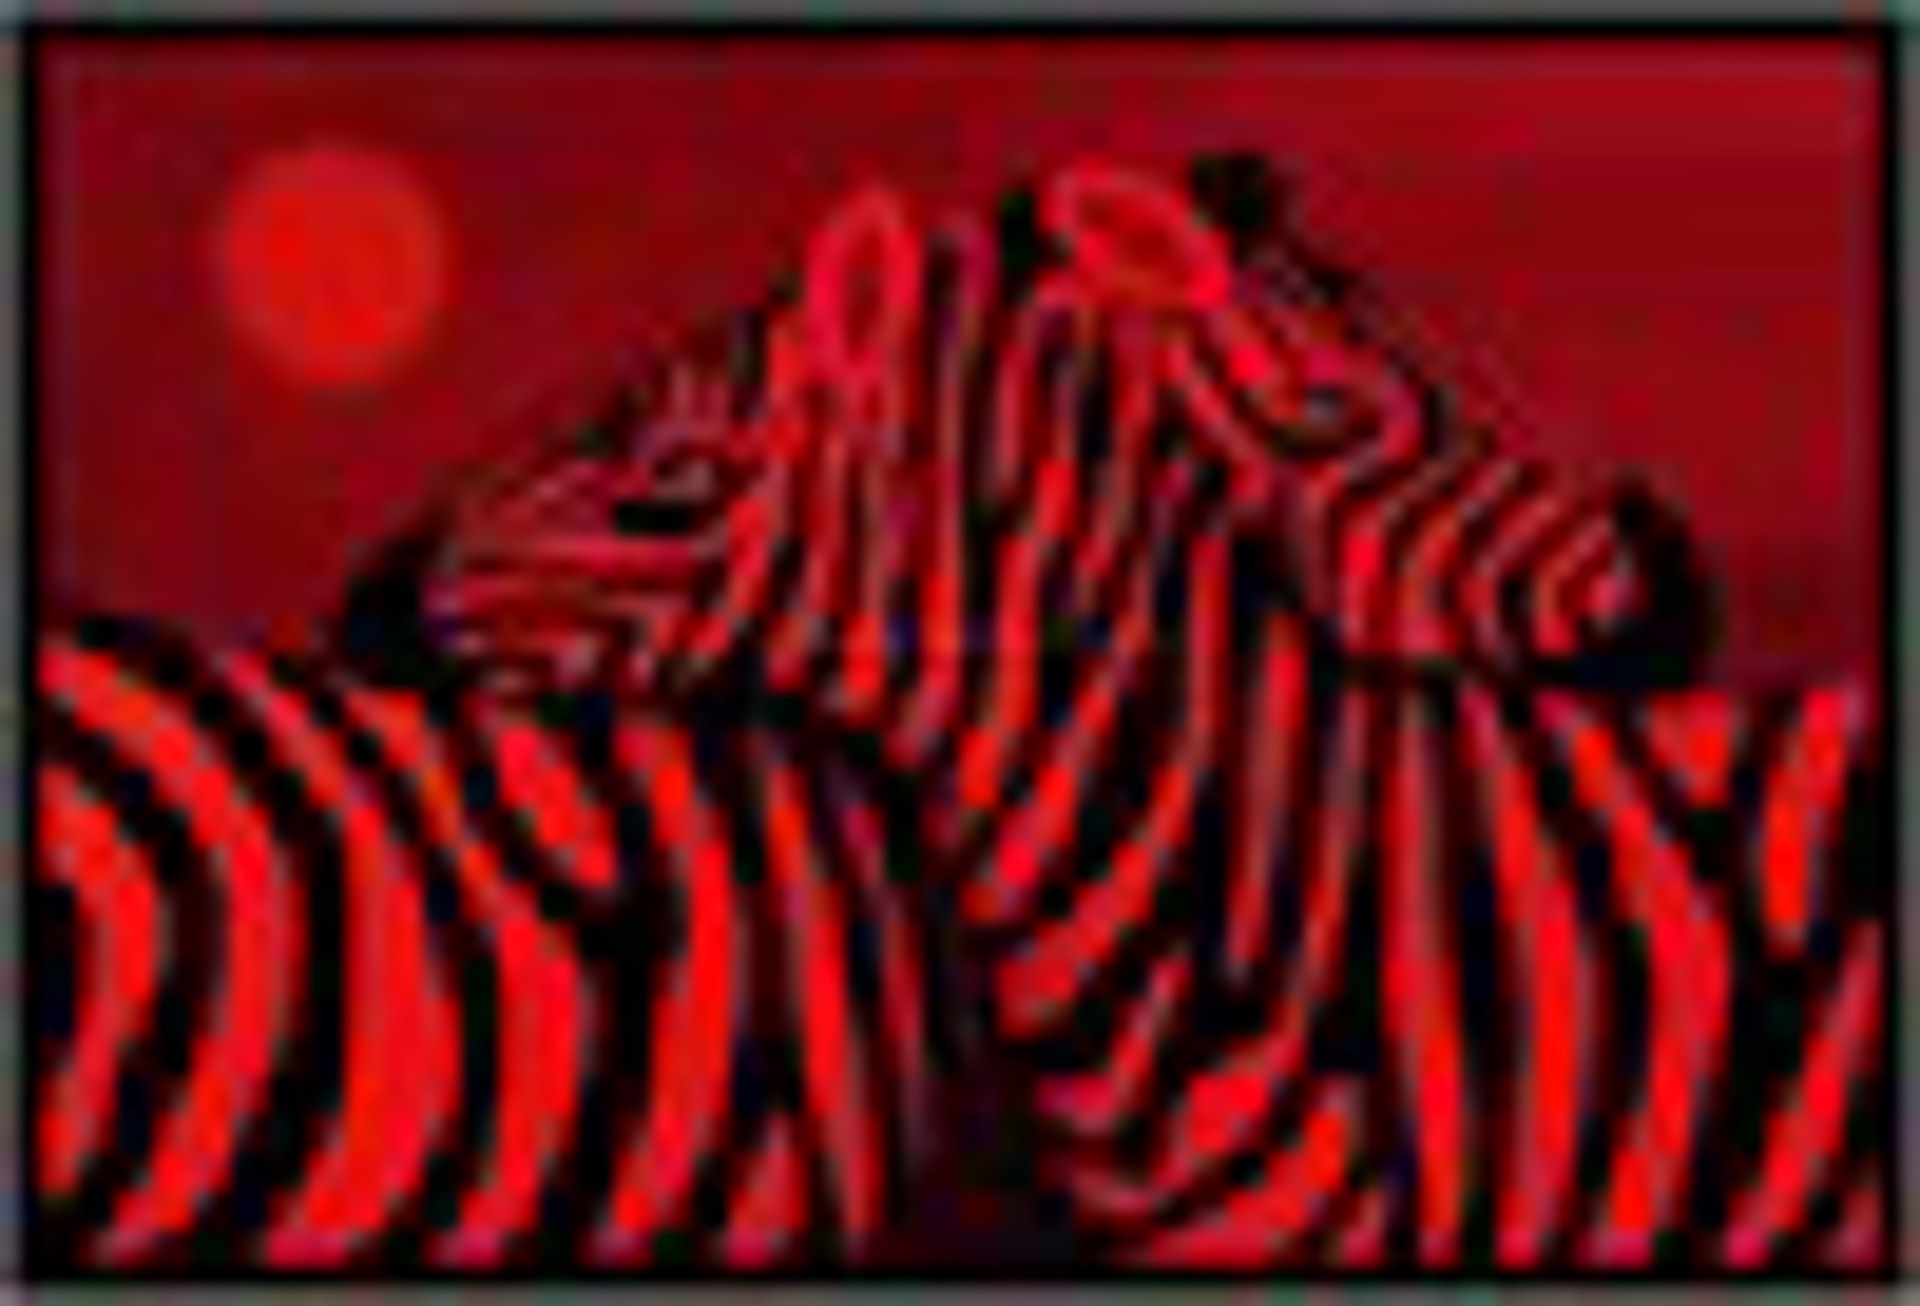 Two Red Zebras - Large Canvas $3500 by Carole LaRoche